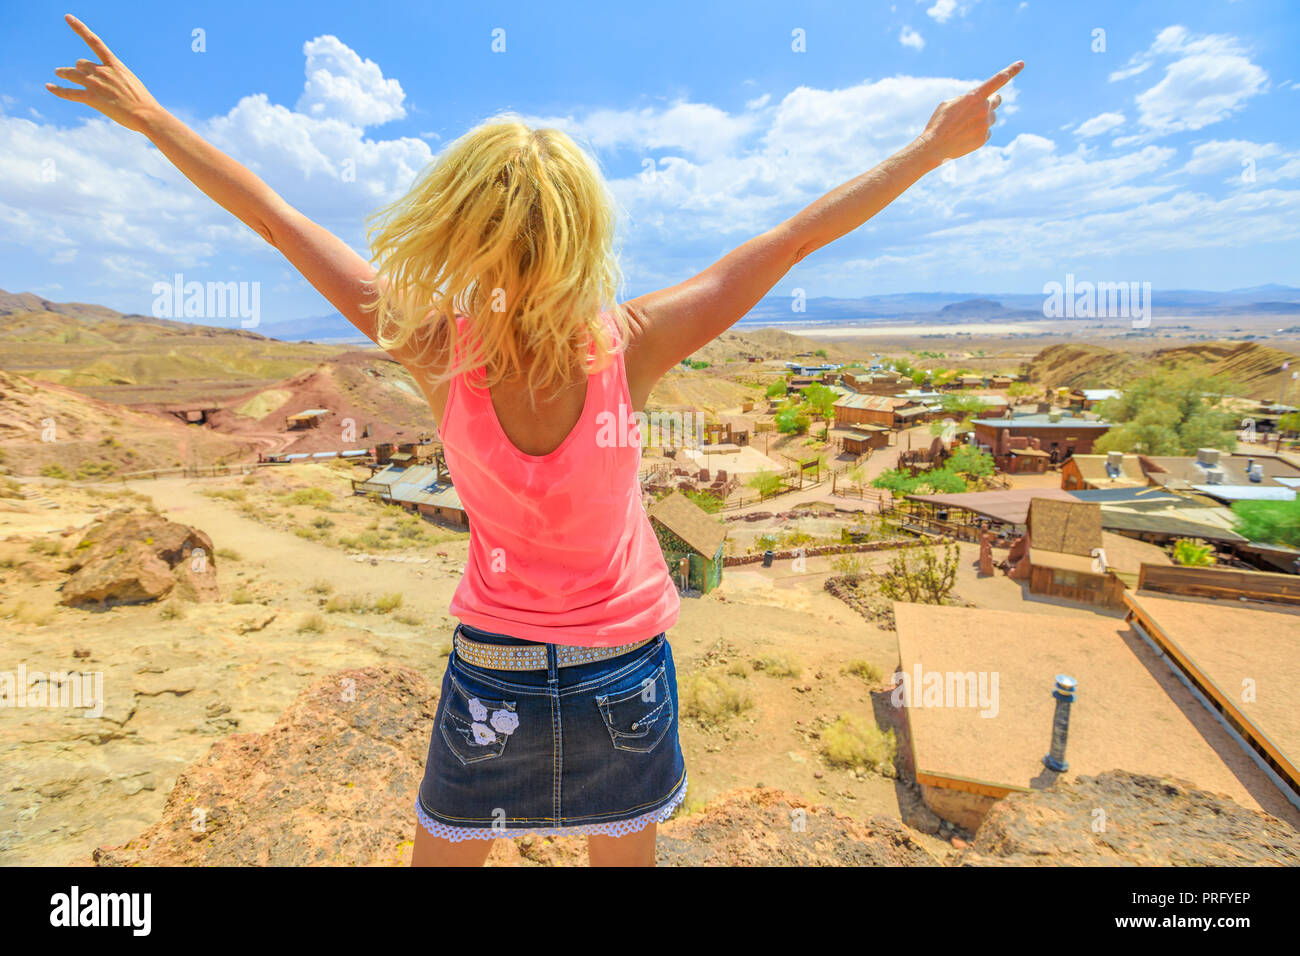 Woman with open arms enjoying at aerial view of Calico atop of overlook. Calico is a Ghost Town and former Mining town in Calico Mountains of Mojave Desert region of California, United States. Stock Photo